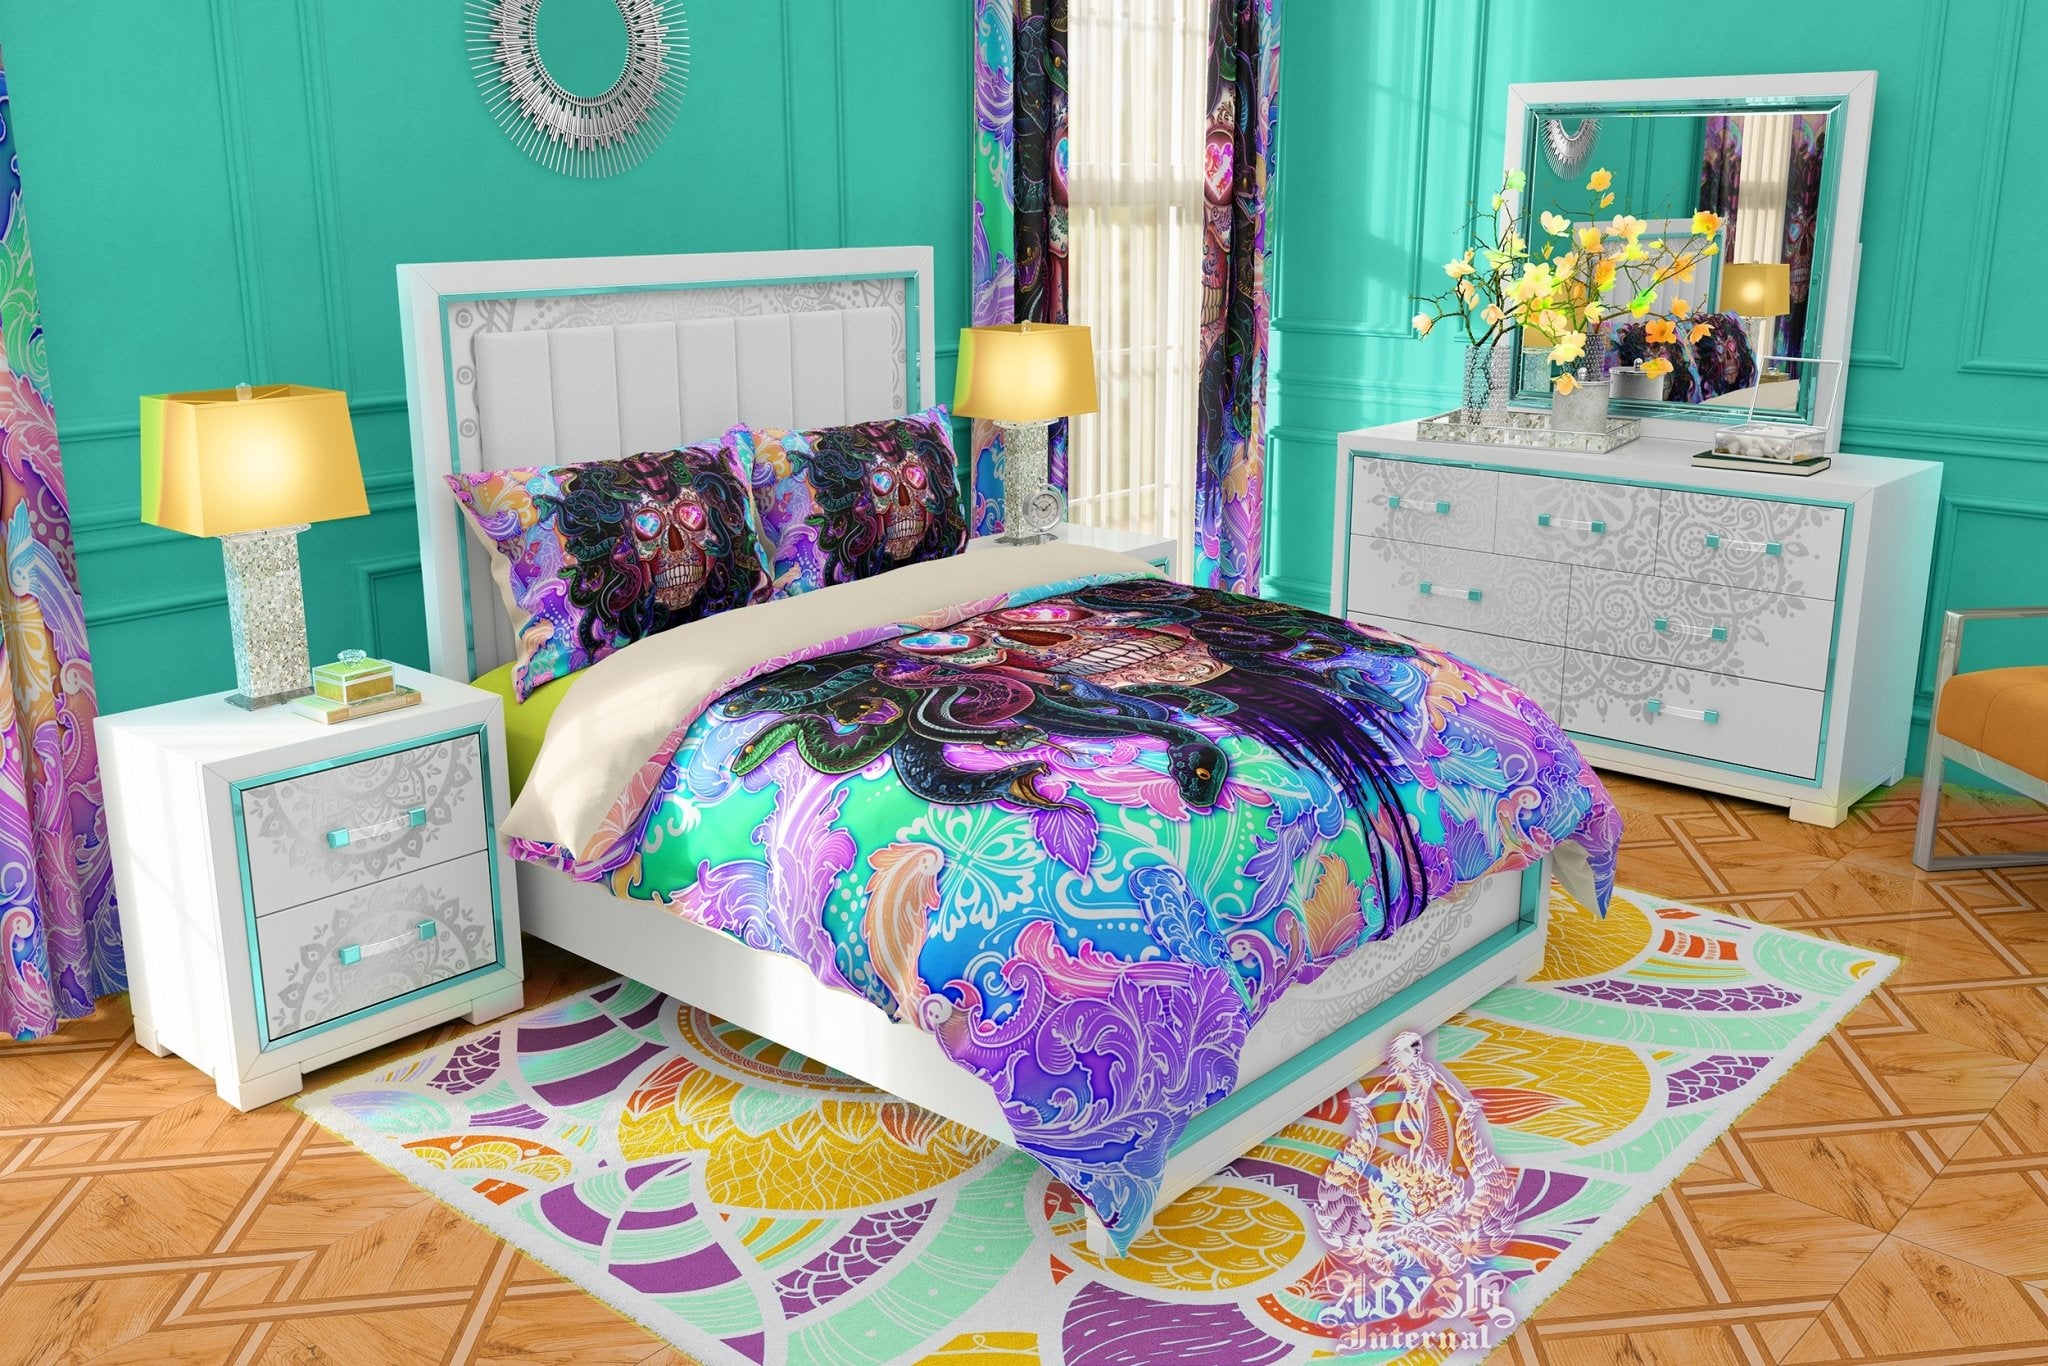 Pastel Punk Skull Bedding Set, Comforter and Duvet, Aesthetic Bed Cover, Kawaii Gamer Bedroom Decor, King, Queen and Twin Size - Psychedelic Black Medusa - Abysm Internal